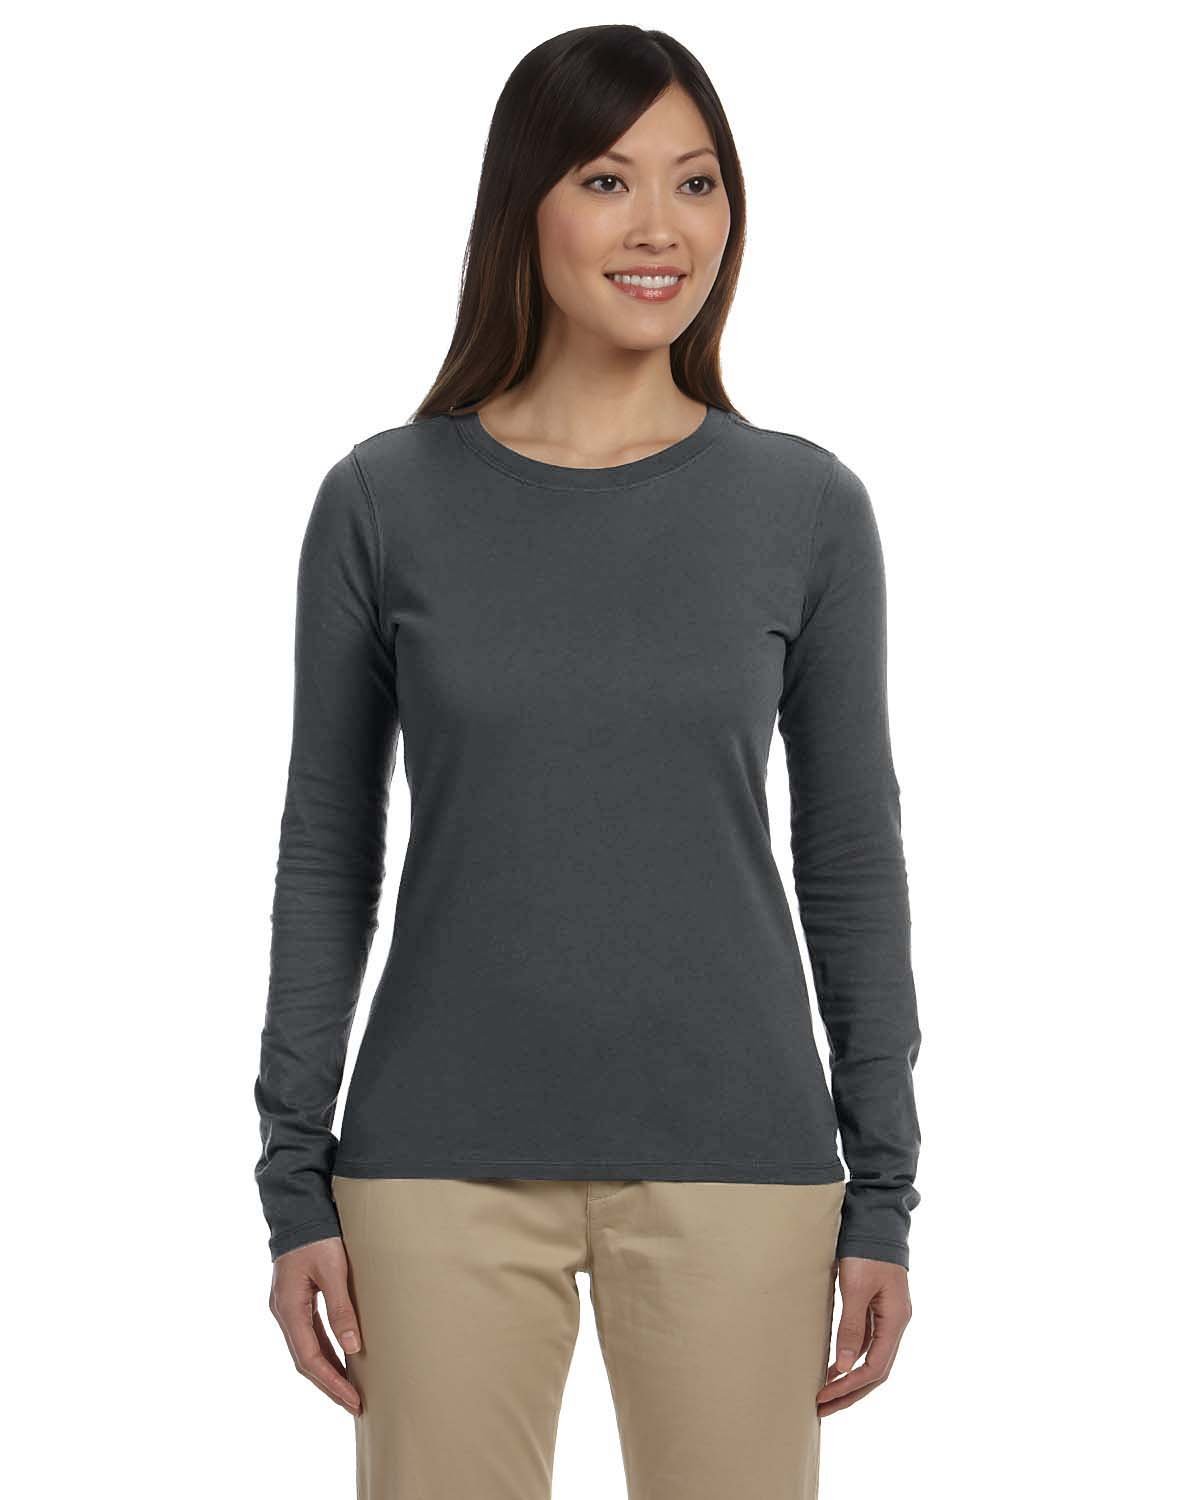 econscious Ladies' Classic Long-Sleeve T-Shirt | alphabroder